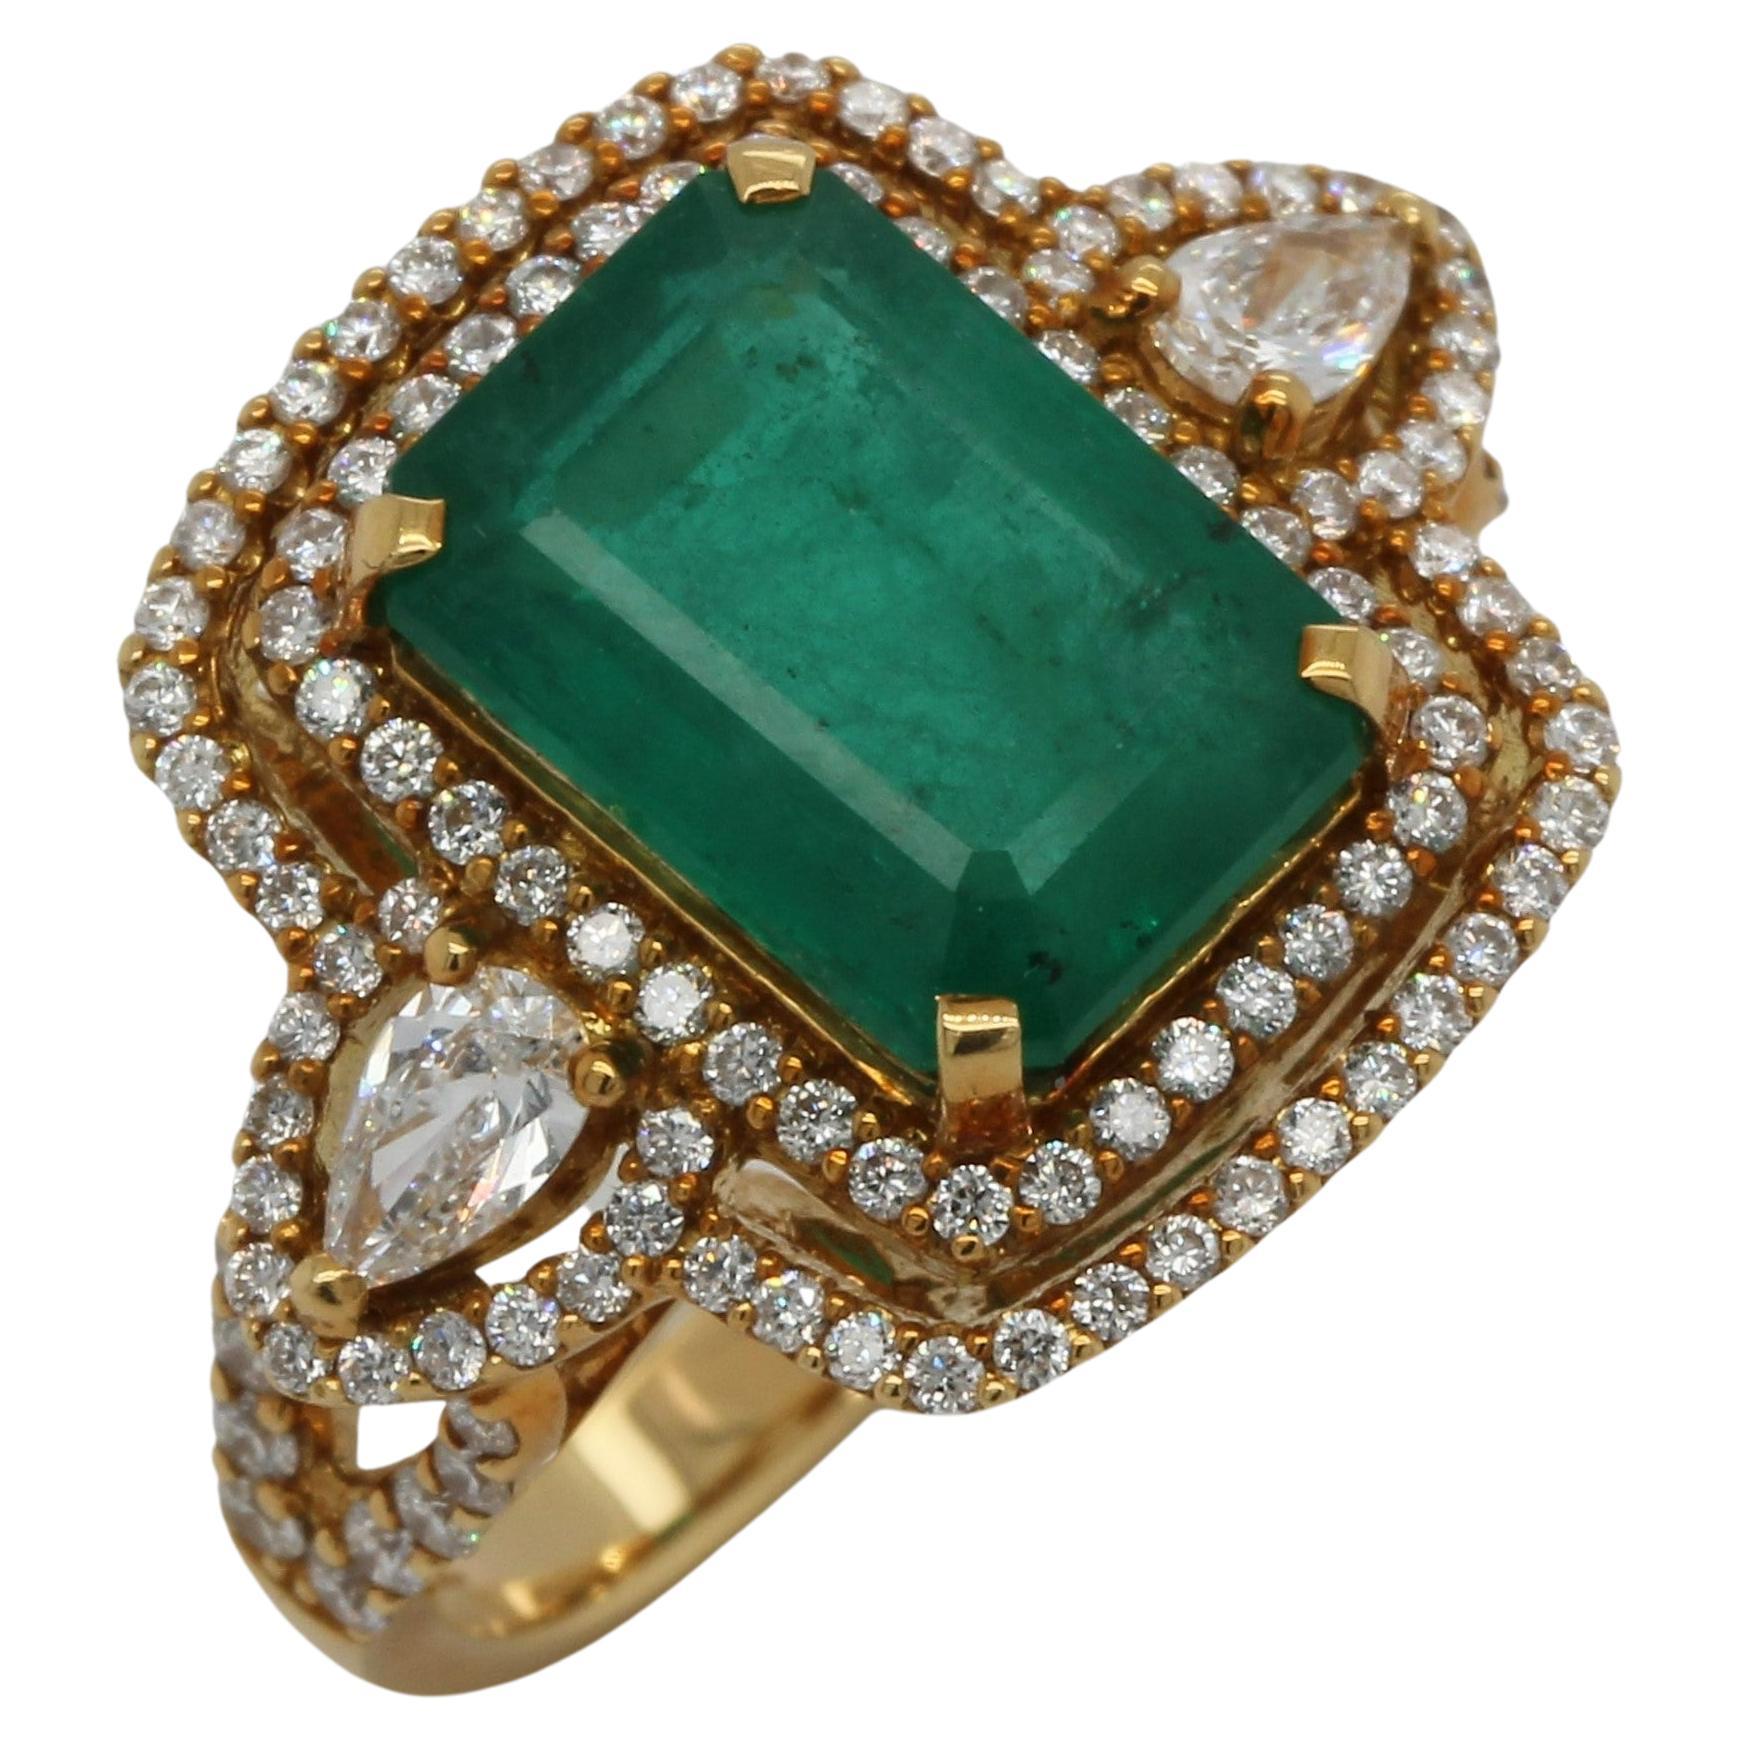 4.59 Carat Emerald And Diamond Ring In 18 Karat Gold For Sale